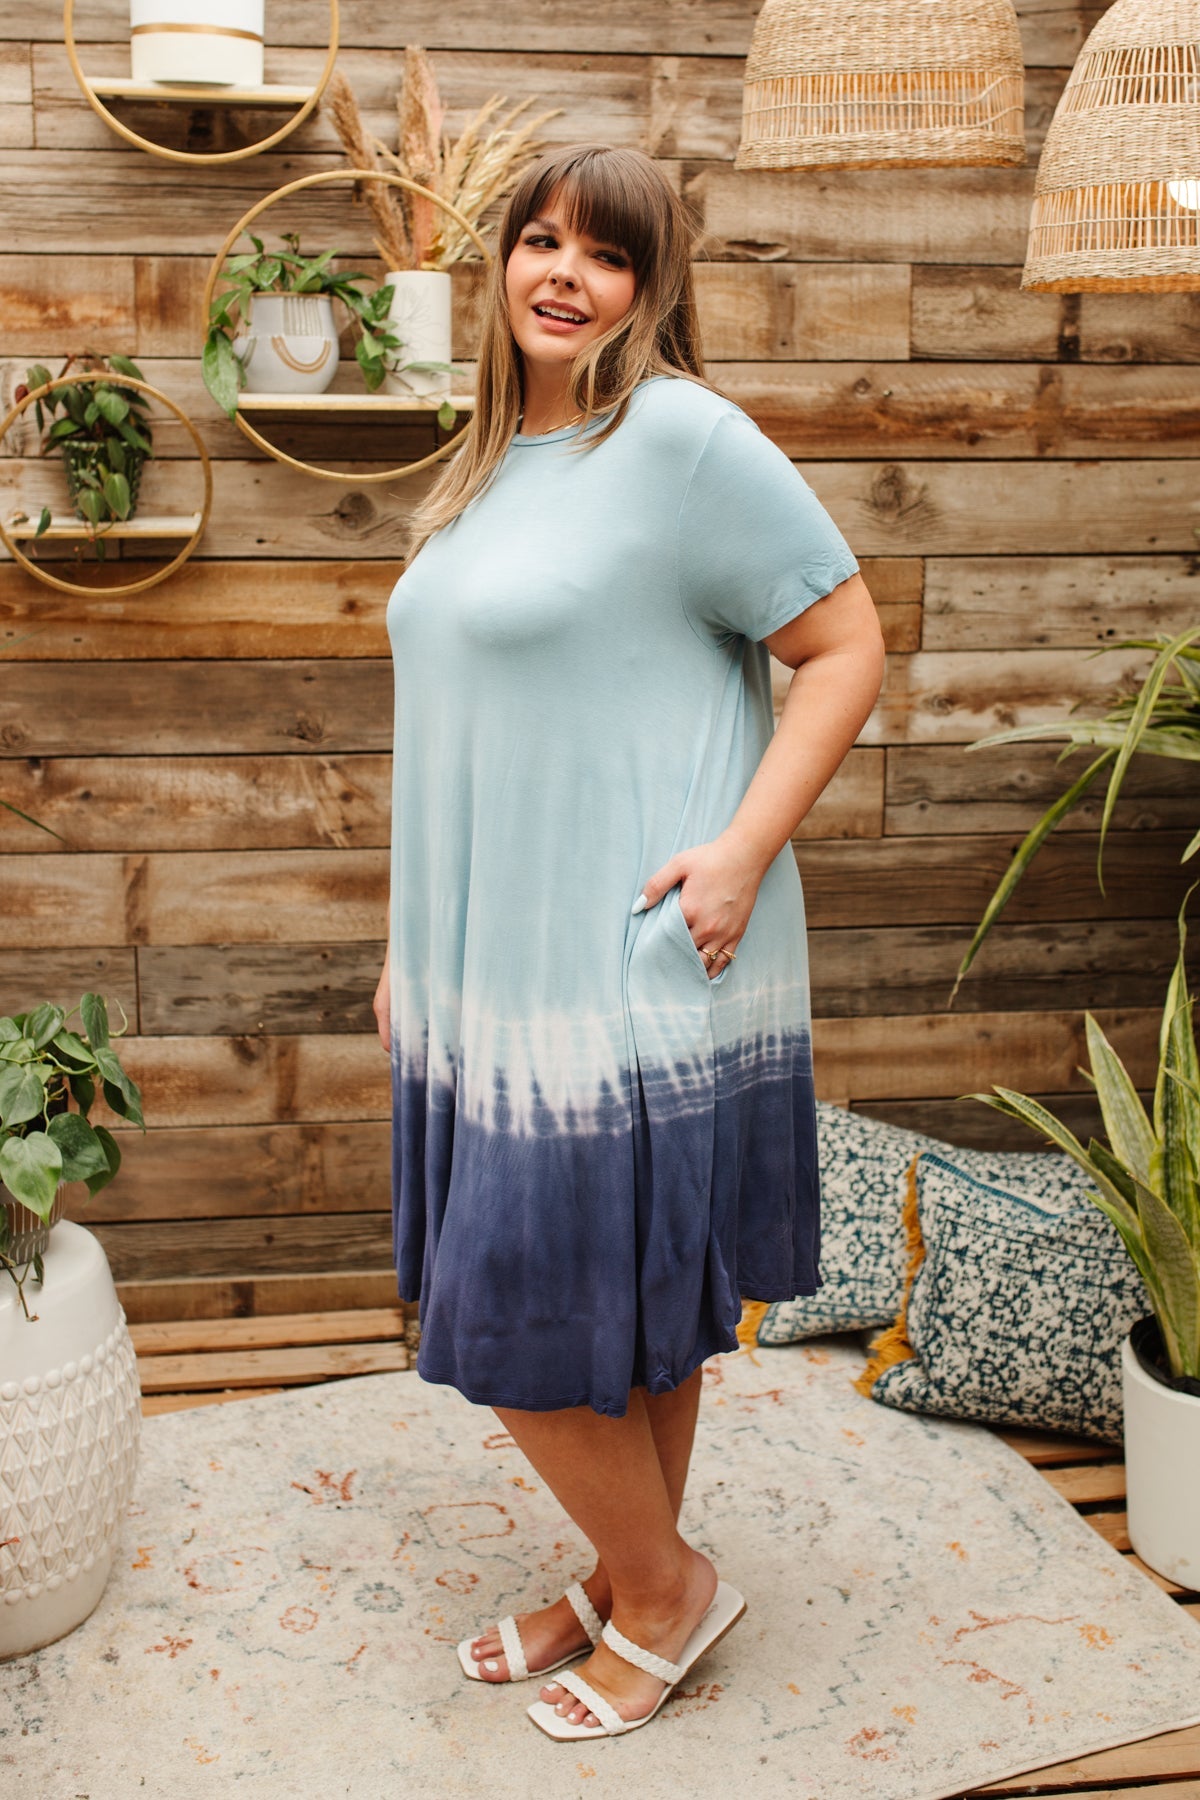 High & Low Tides Tie Dye Dress-Womens-Graceful & Chic Boutique, Family Clothing Store in Waxahachie, Texas